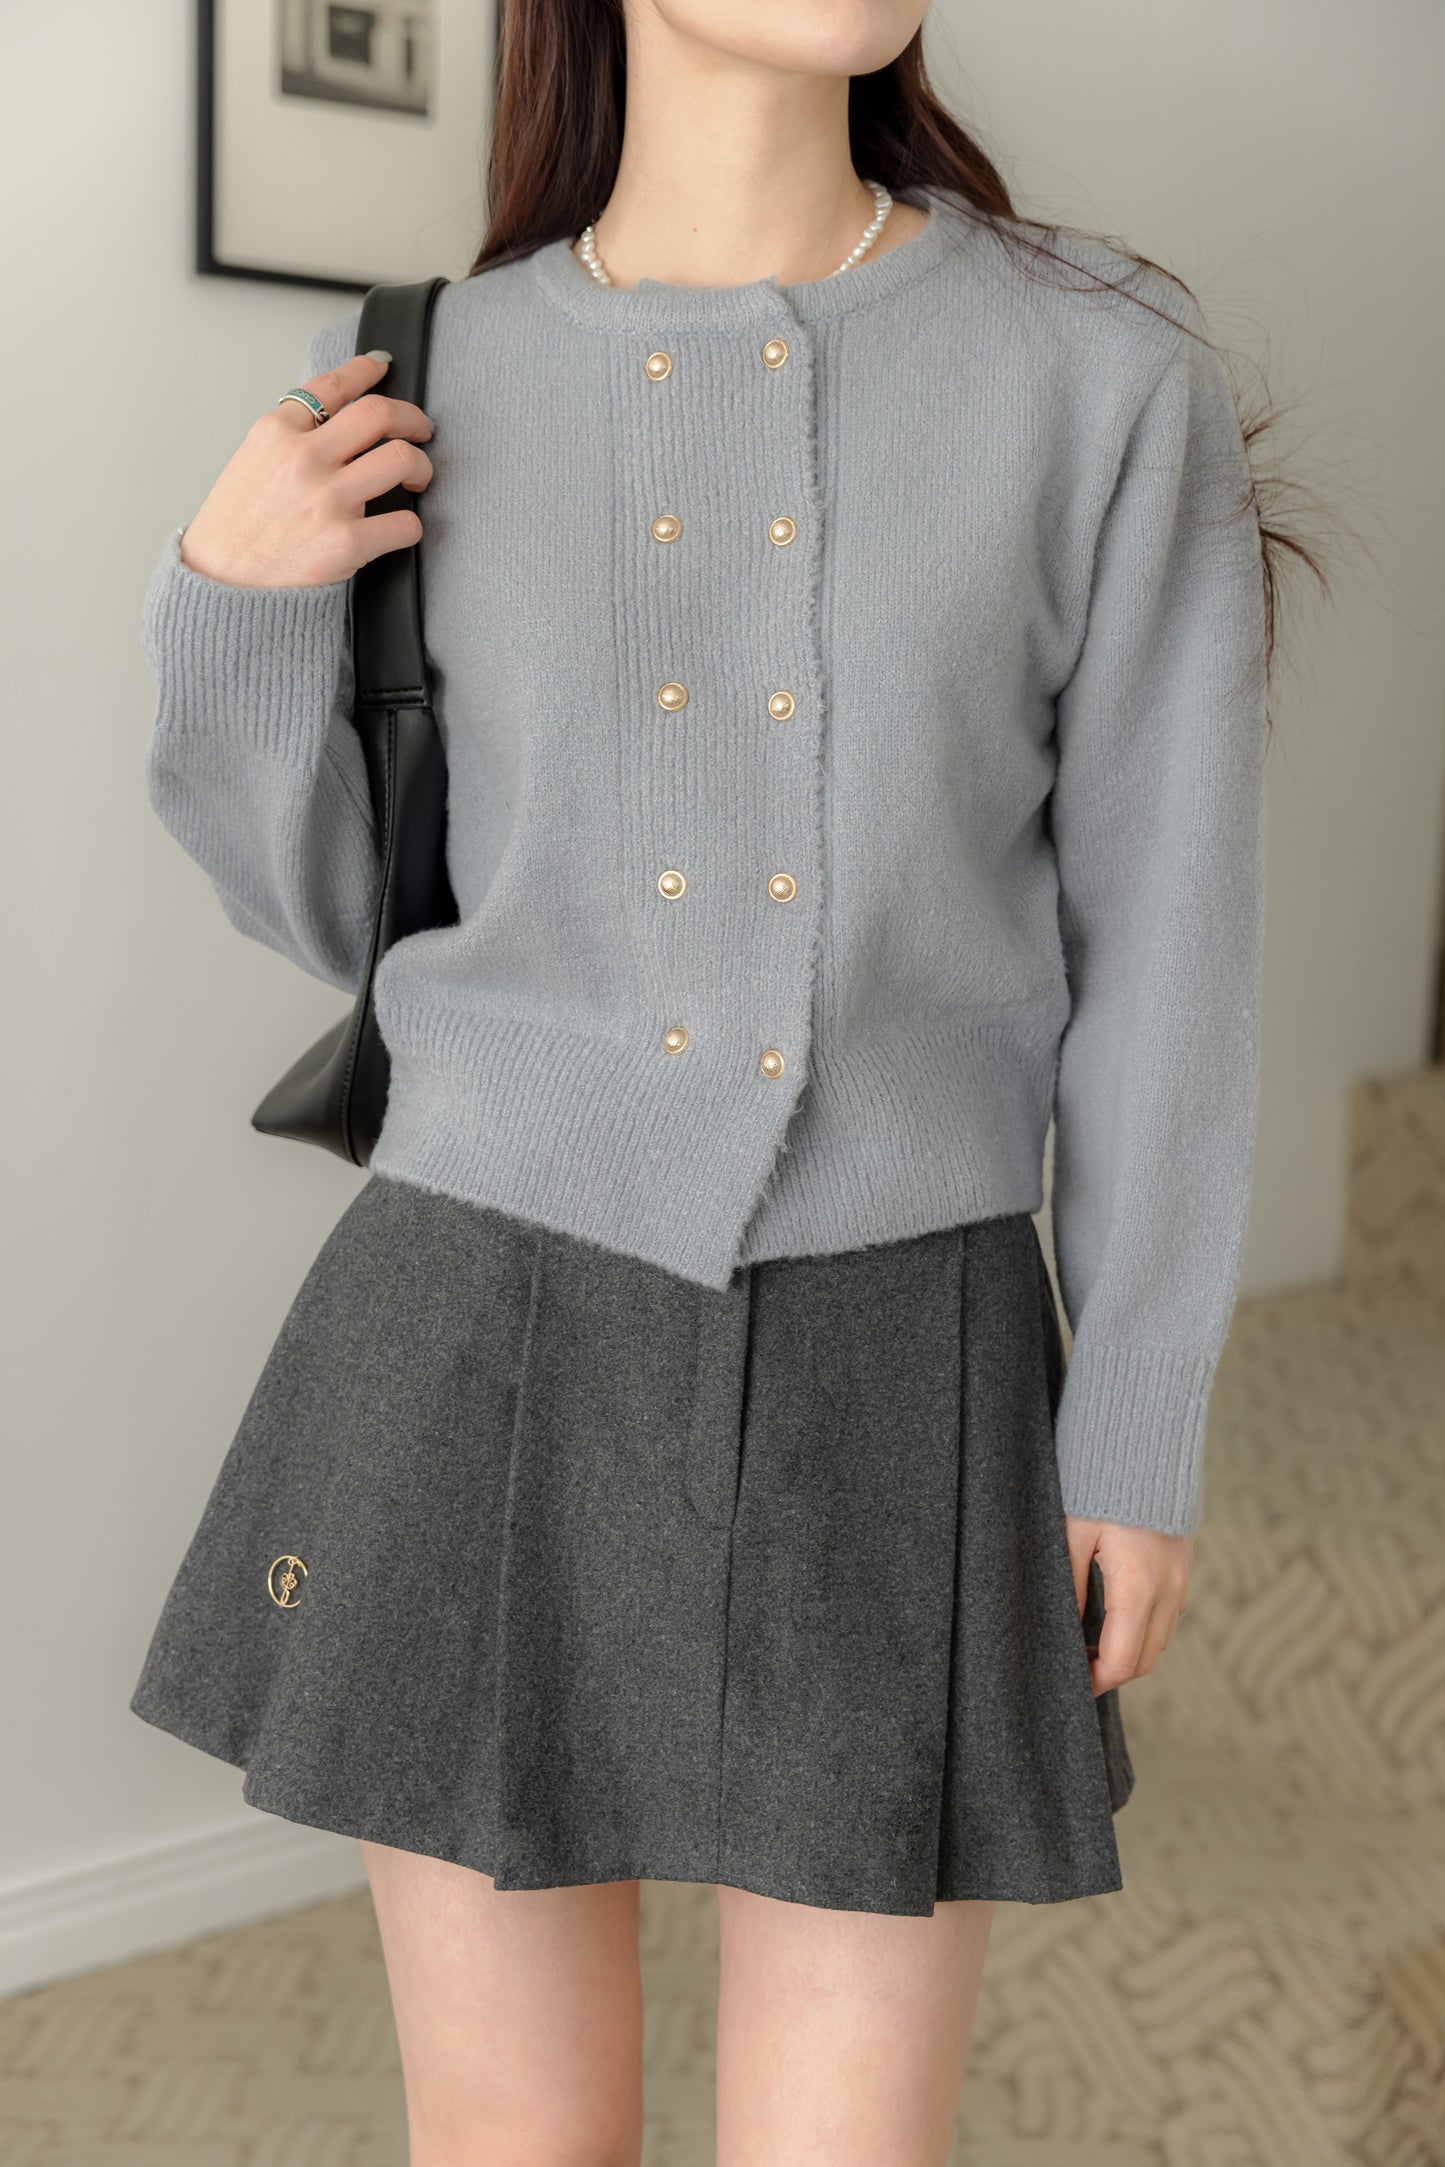 Double Button Cardigan